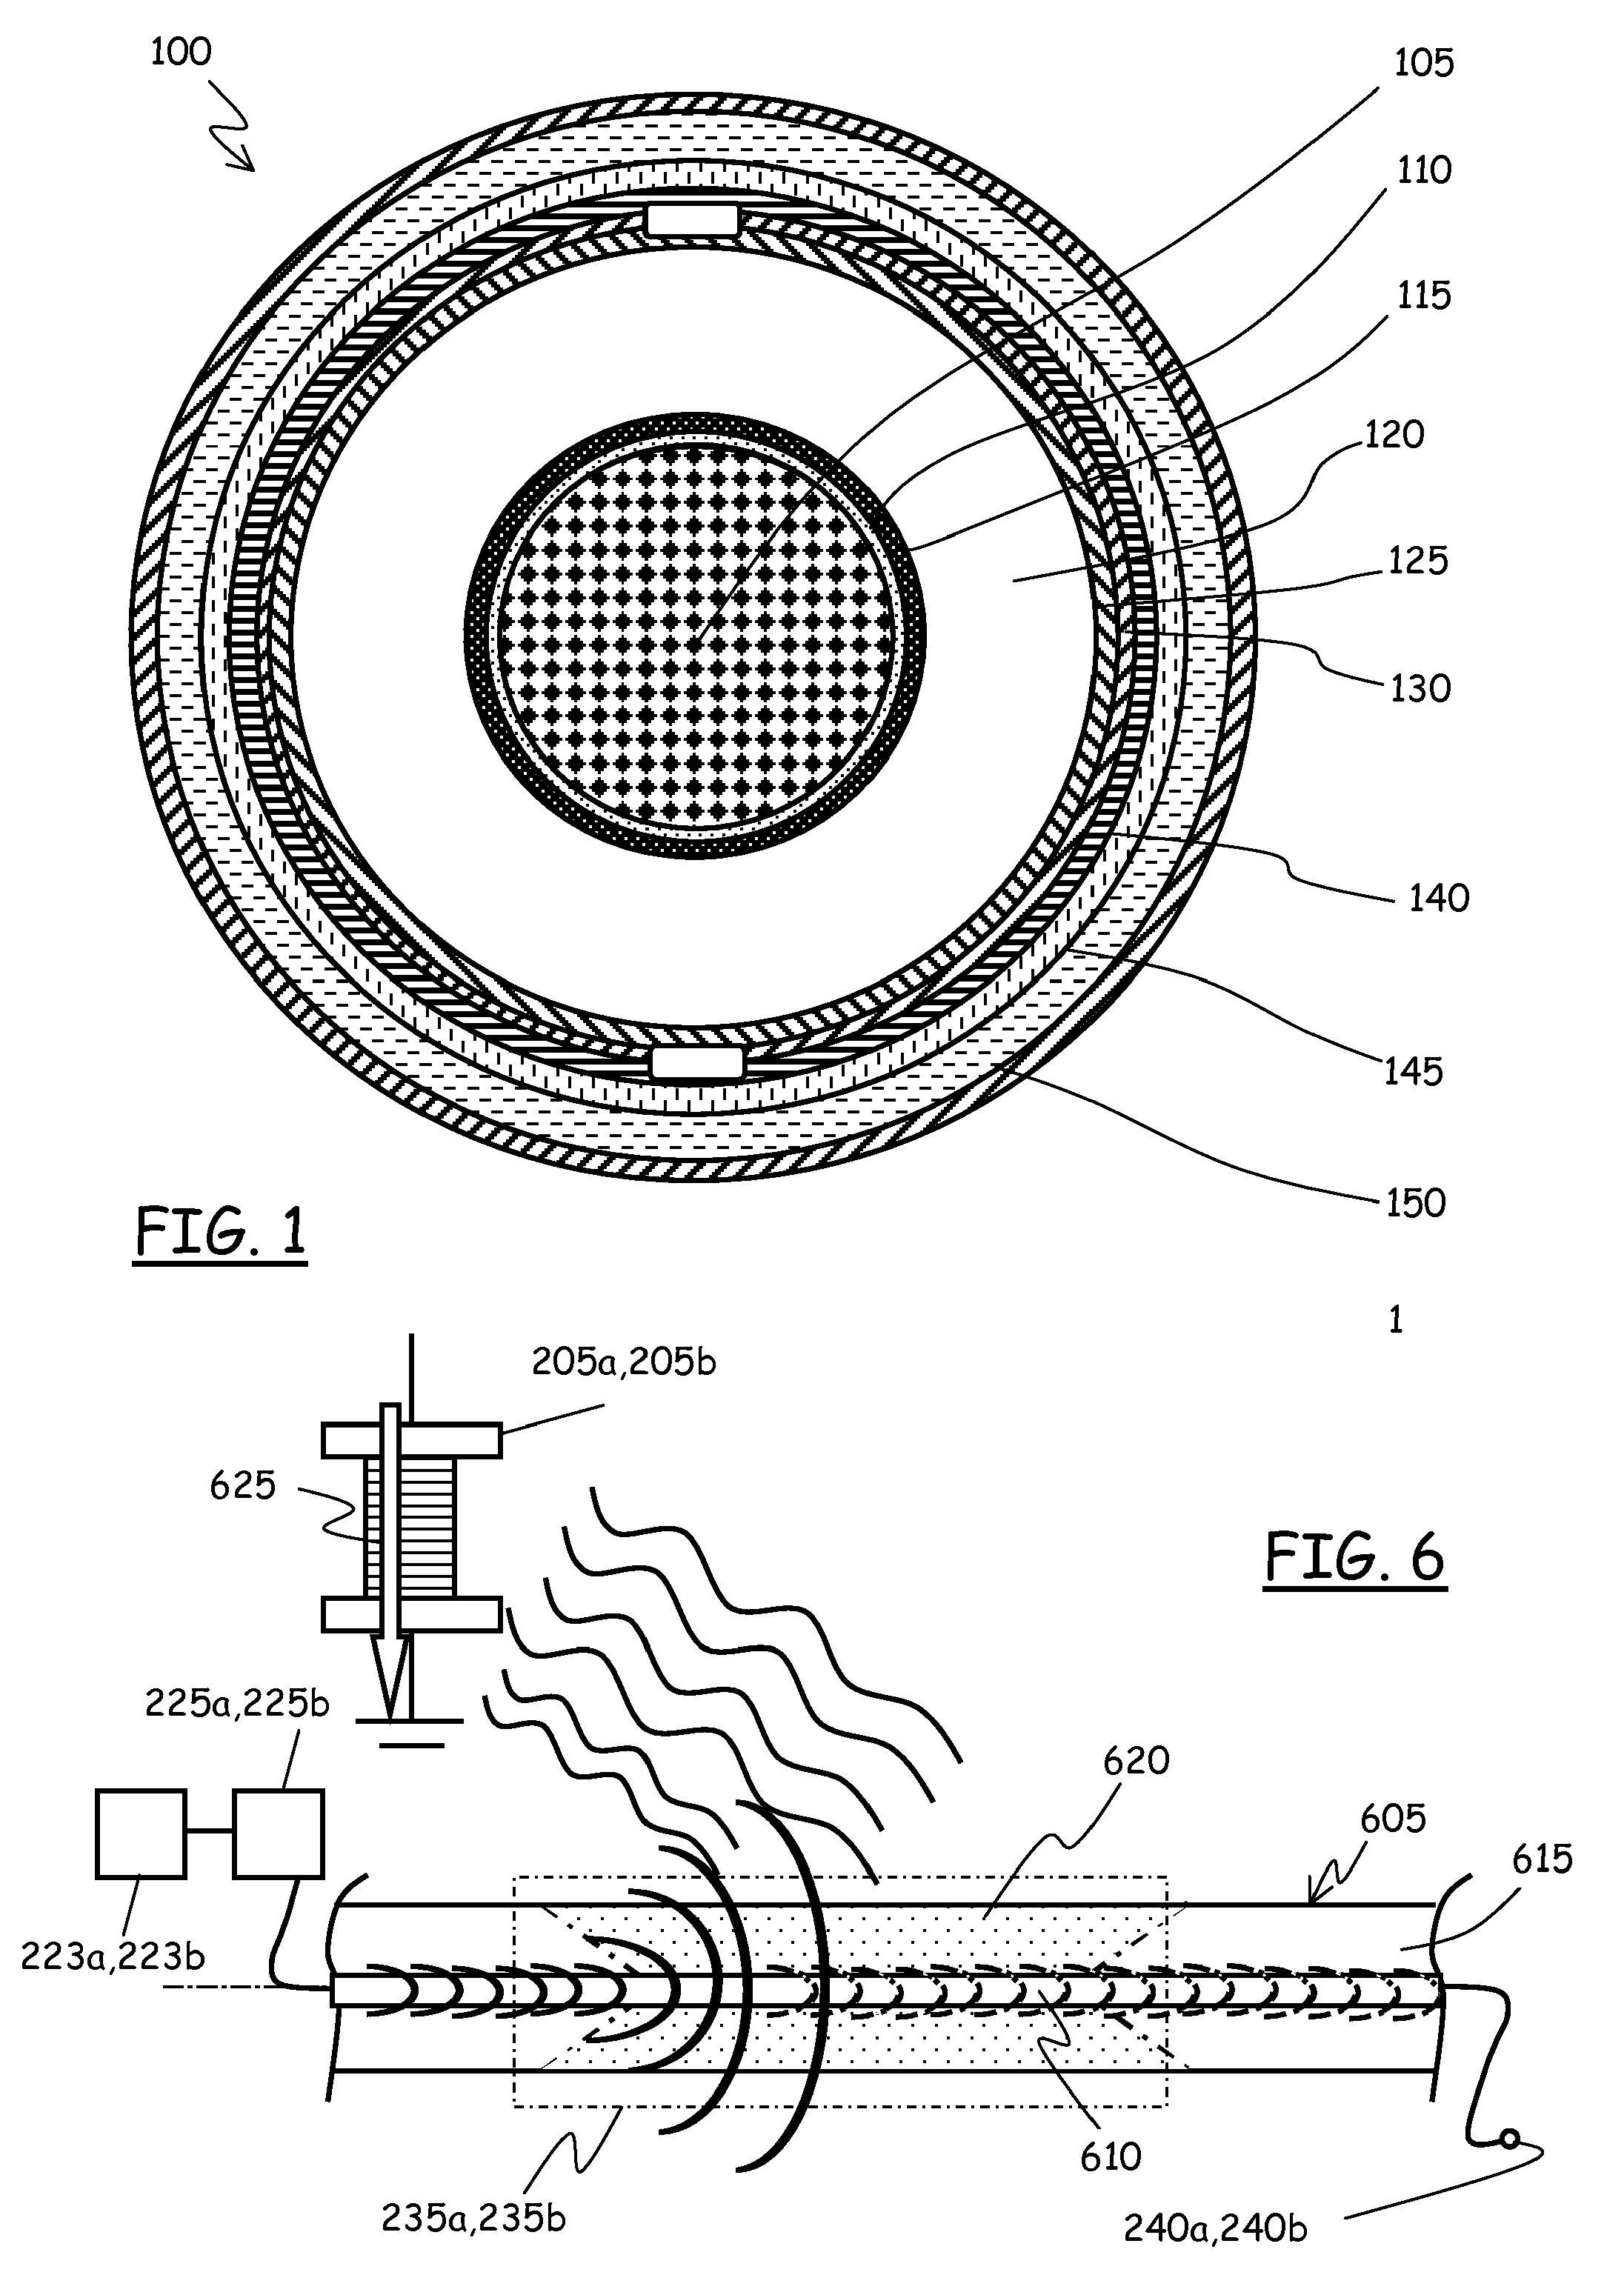 Method and system for fiber-optic monitoring of spatially distributed components